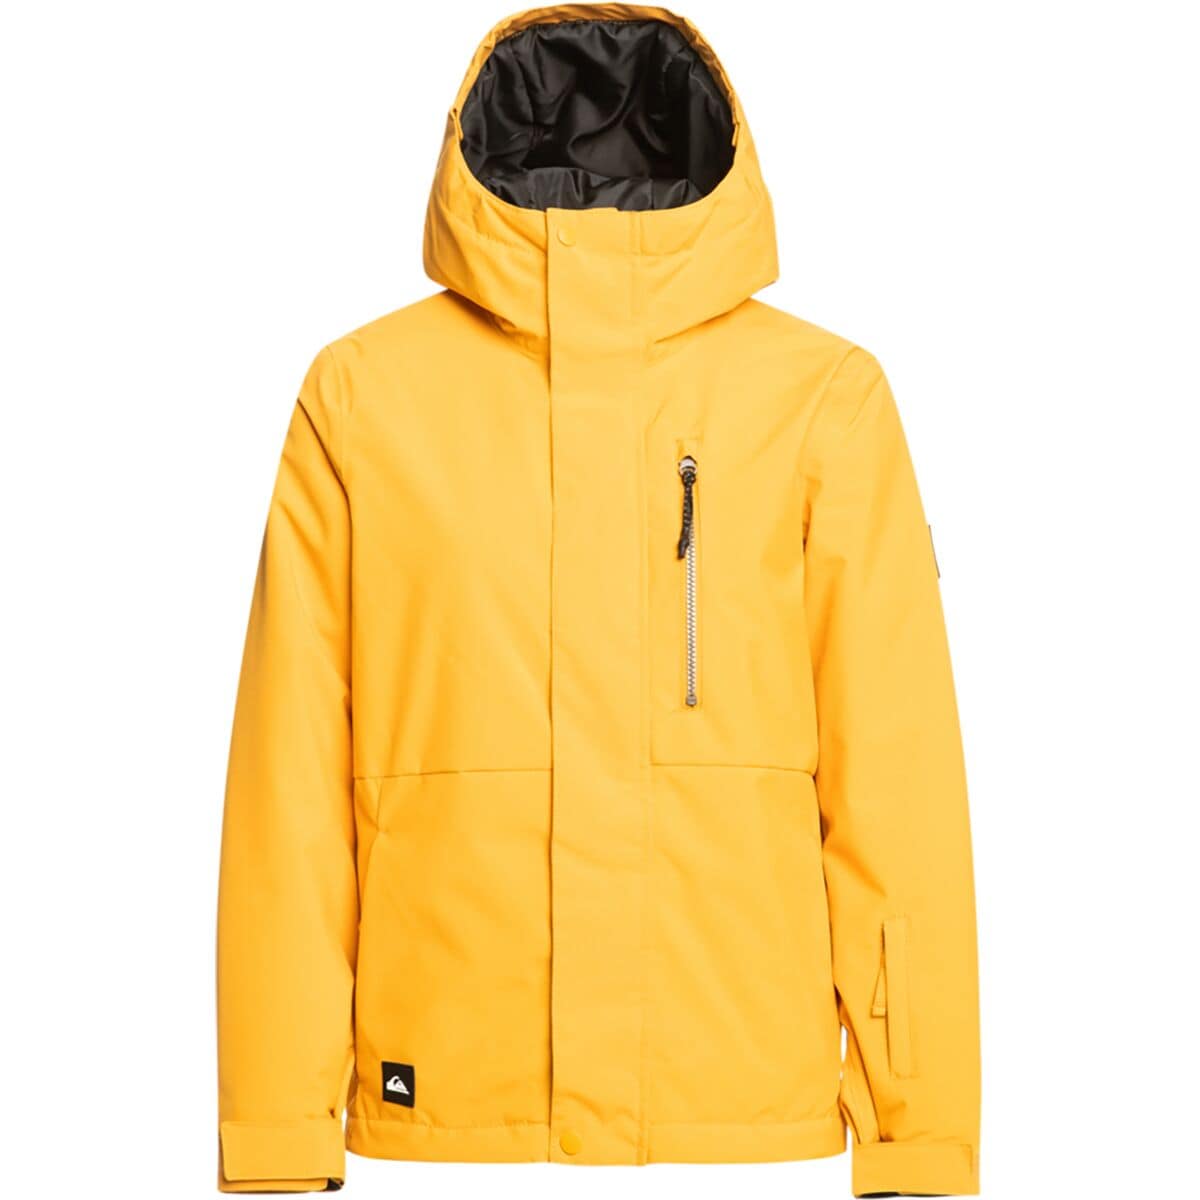 Quiksilver Mission Solid Jacket - Kids' Mineral Yellow